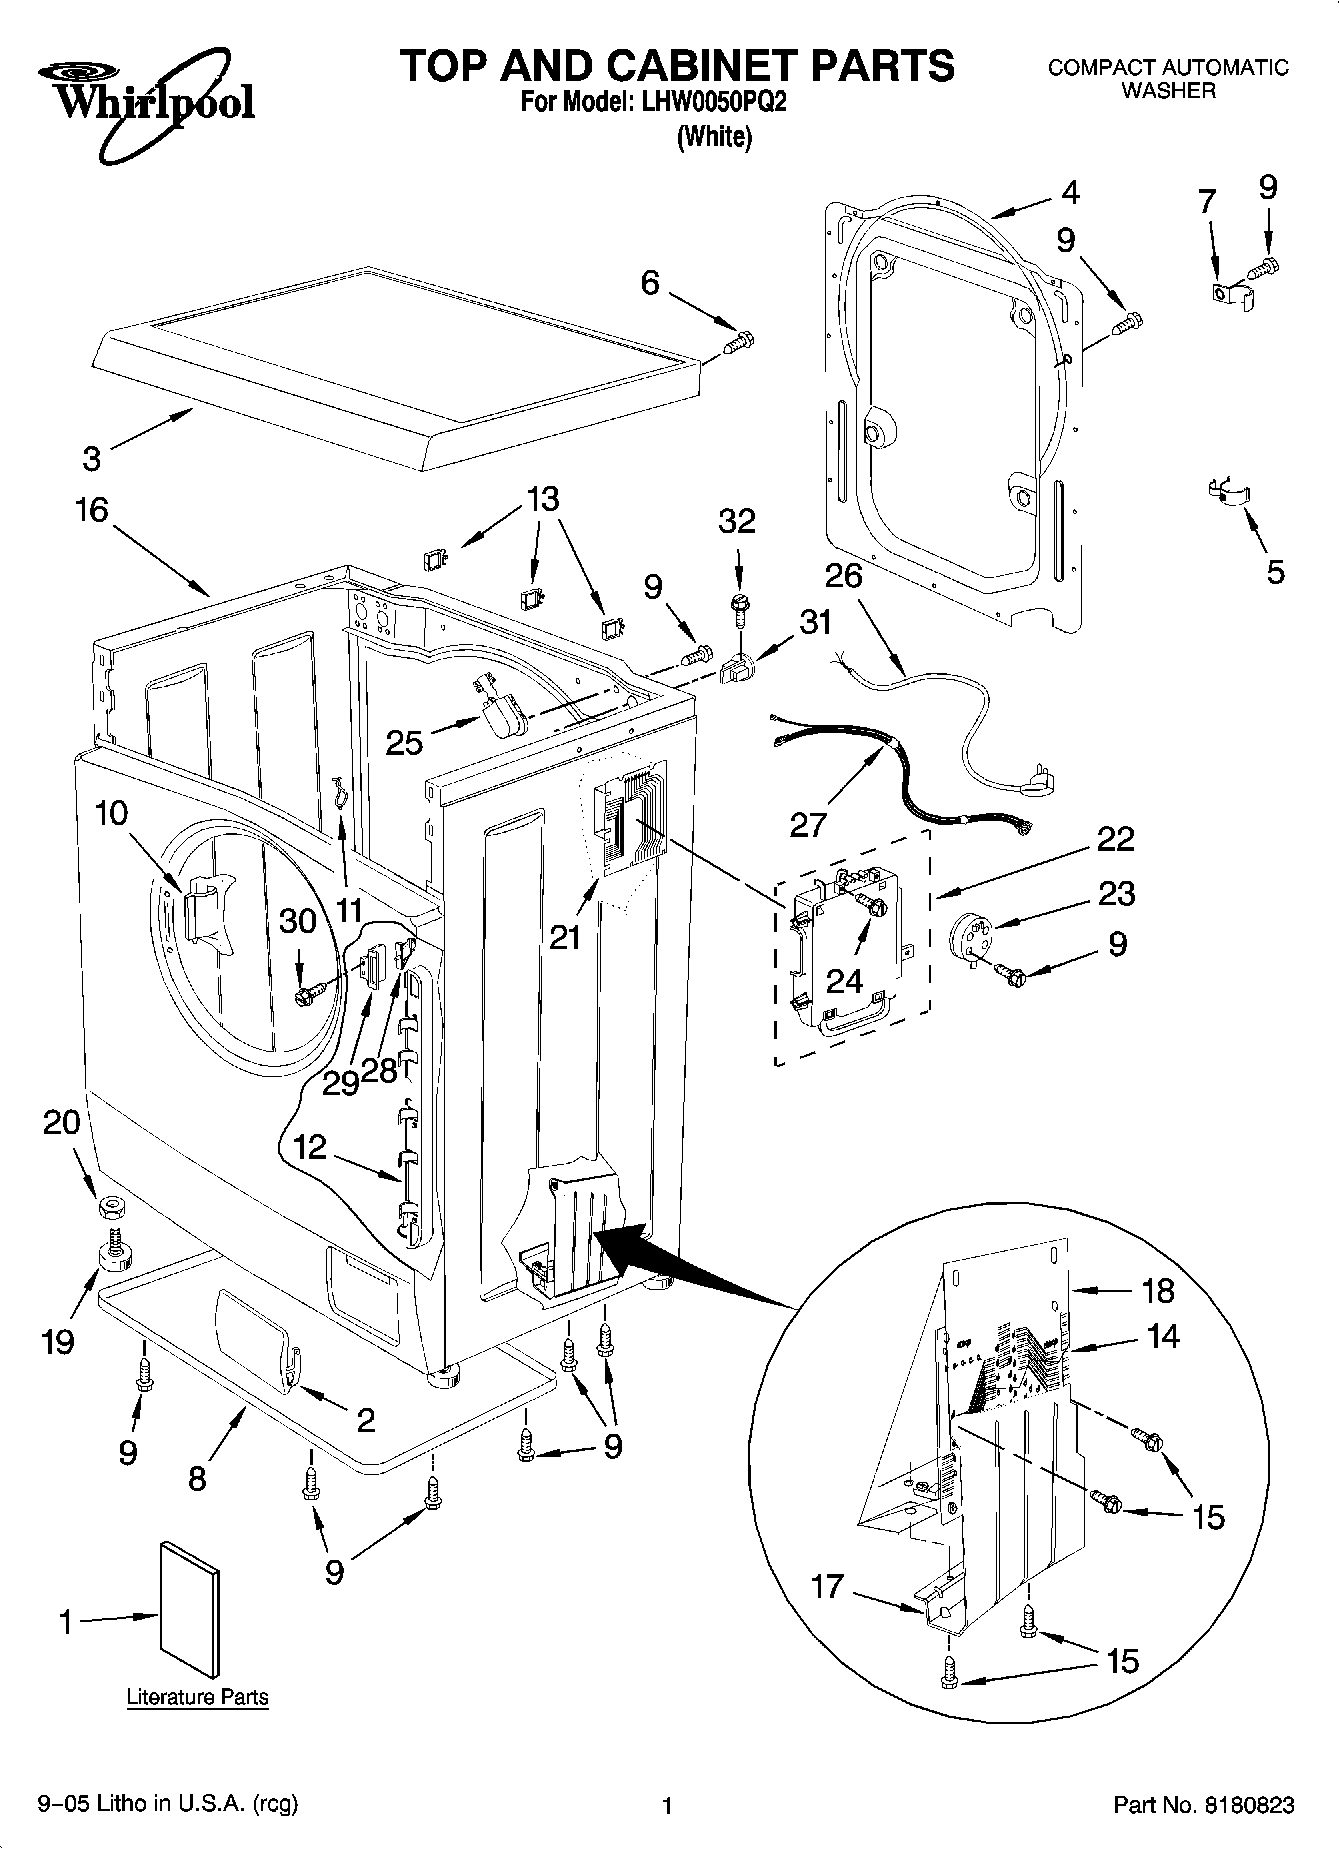 01 - TOP AND CABINET PARTS